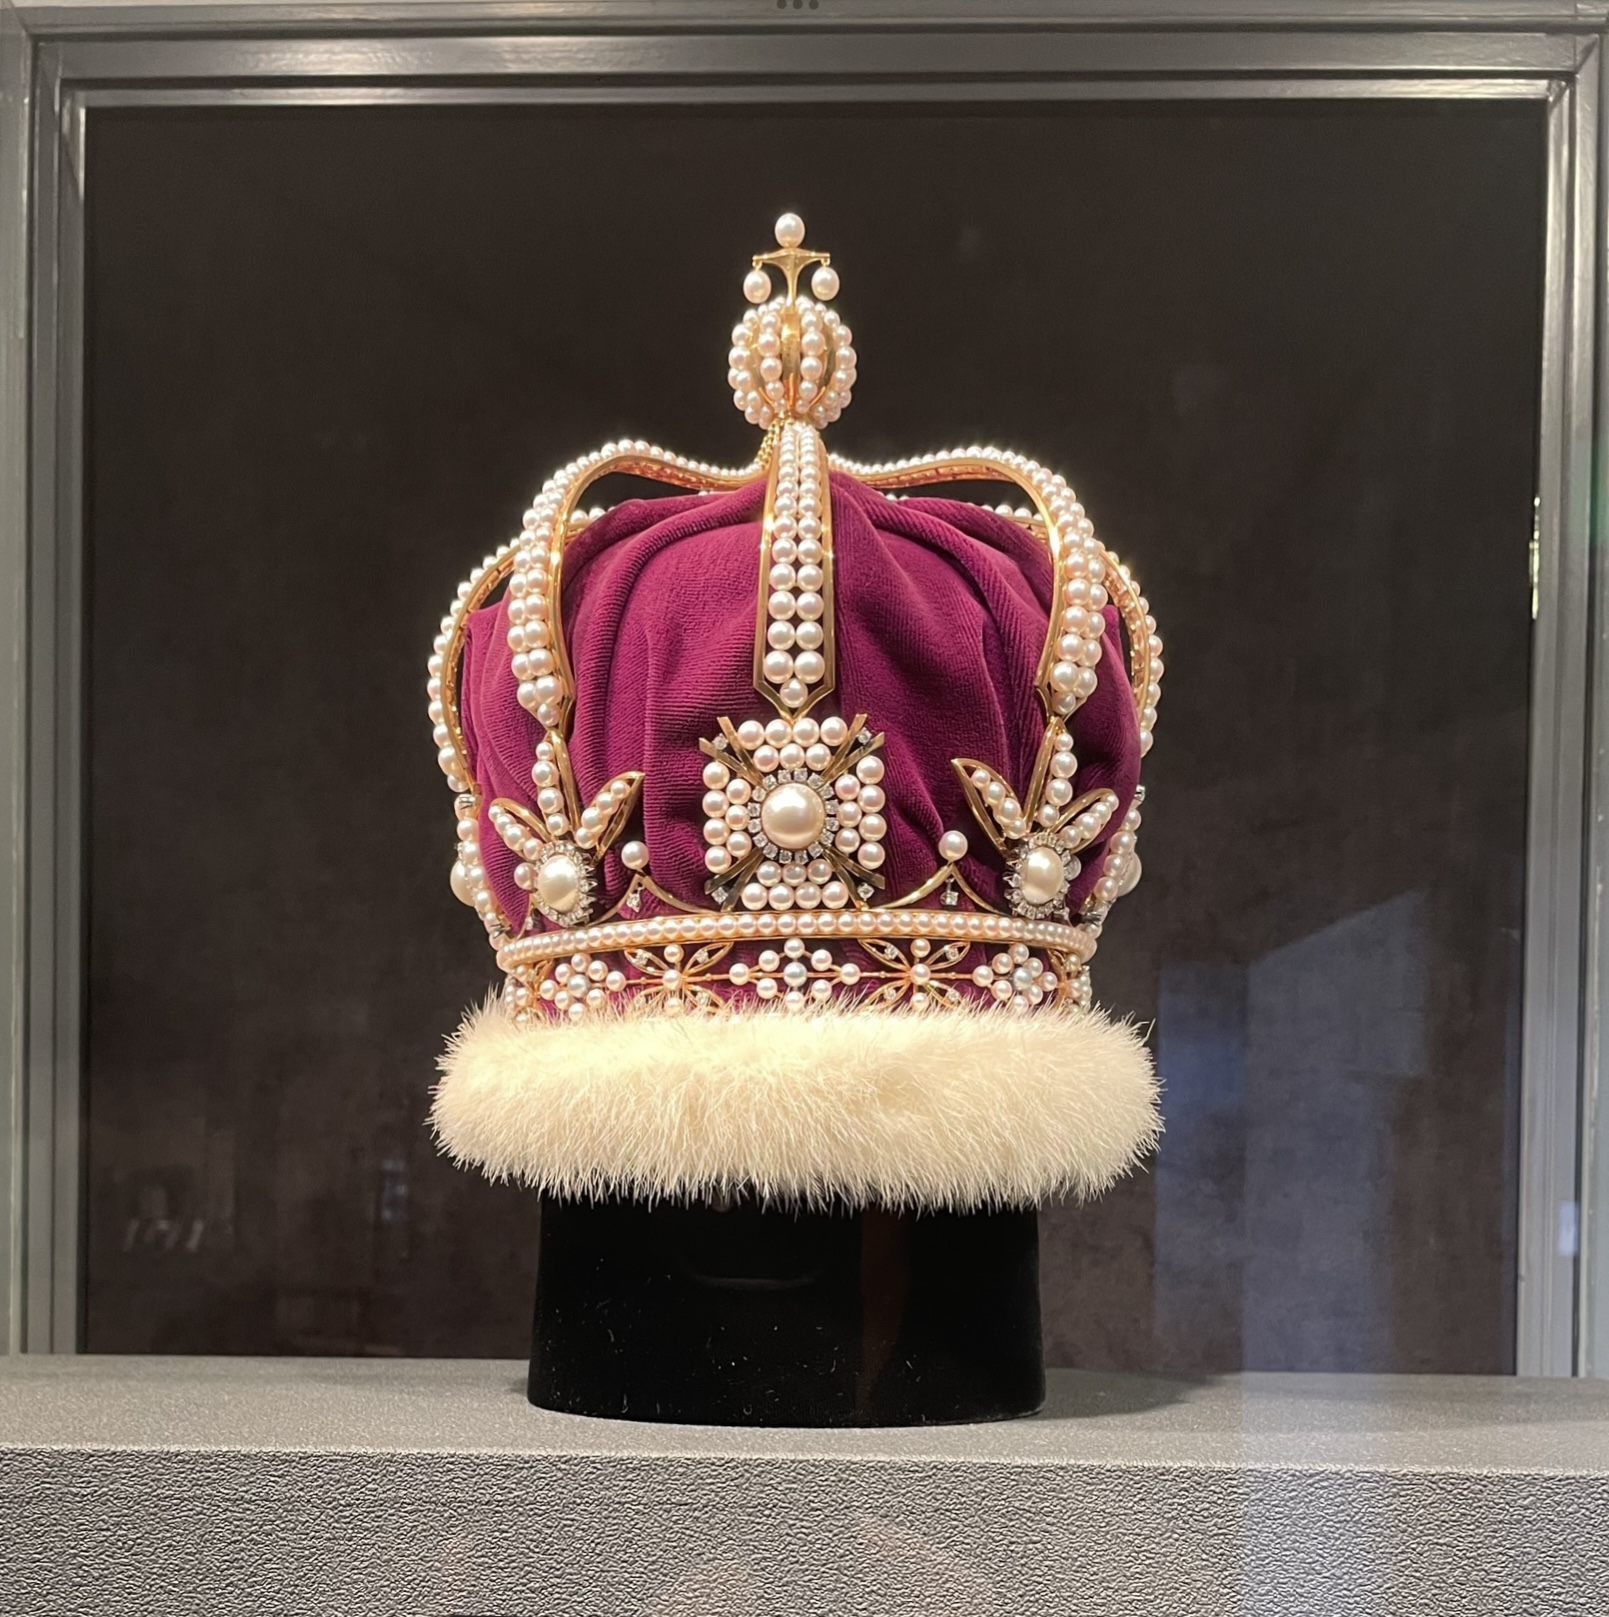 Crown of pearls - Mikimoto Pearl Museum